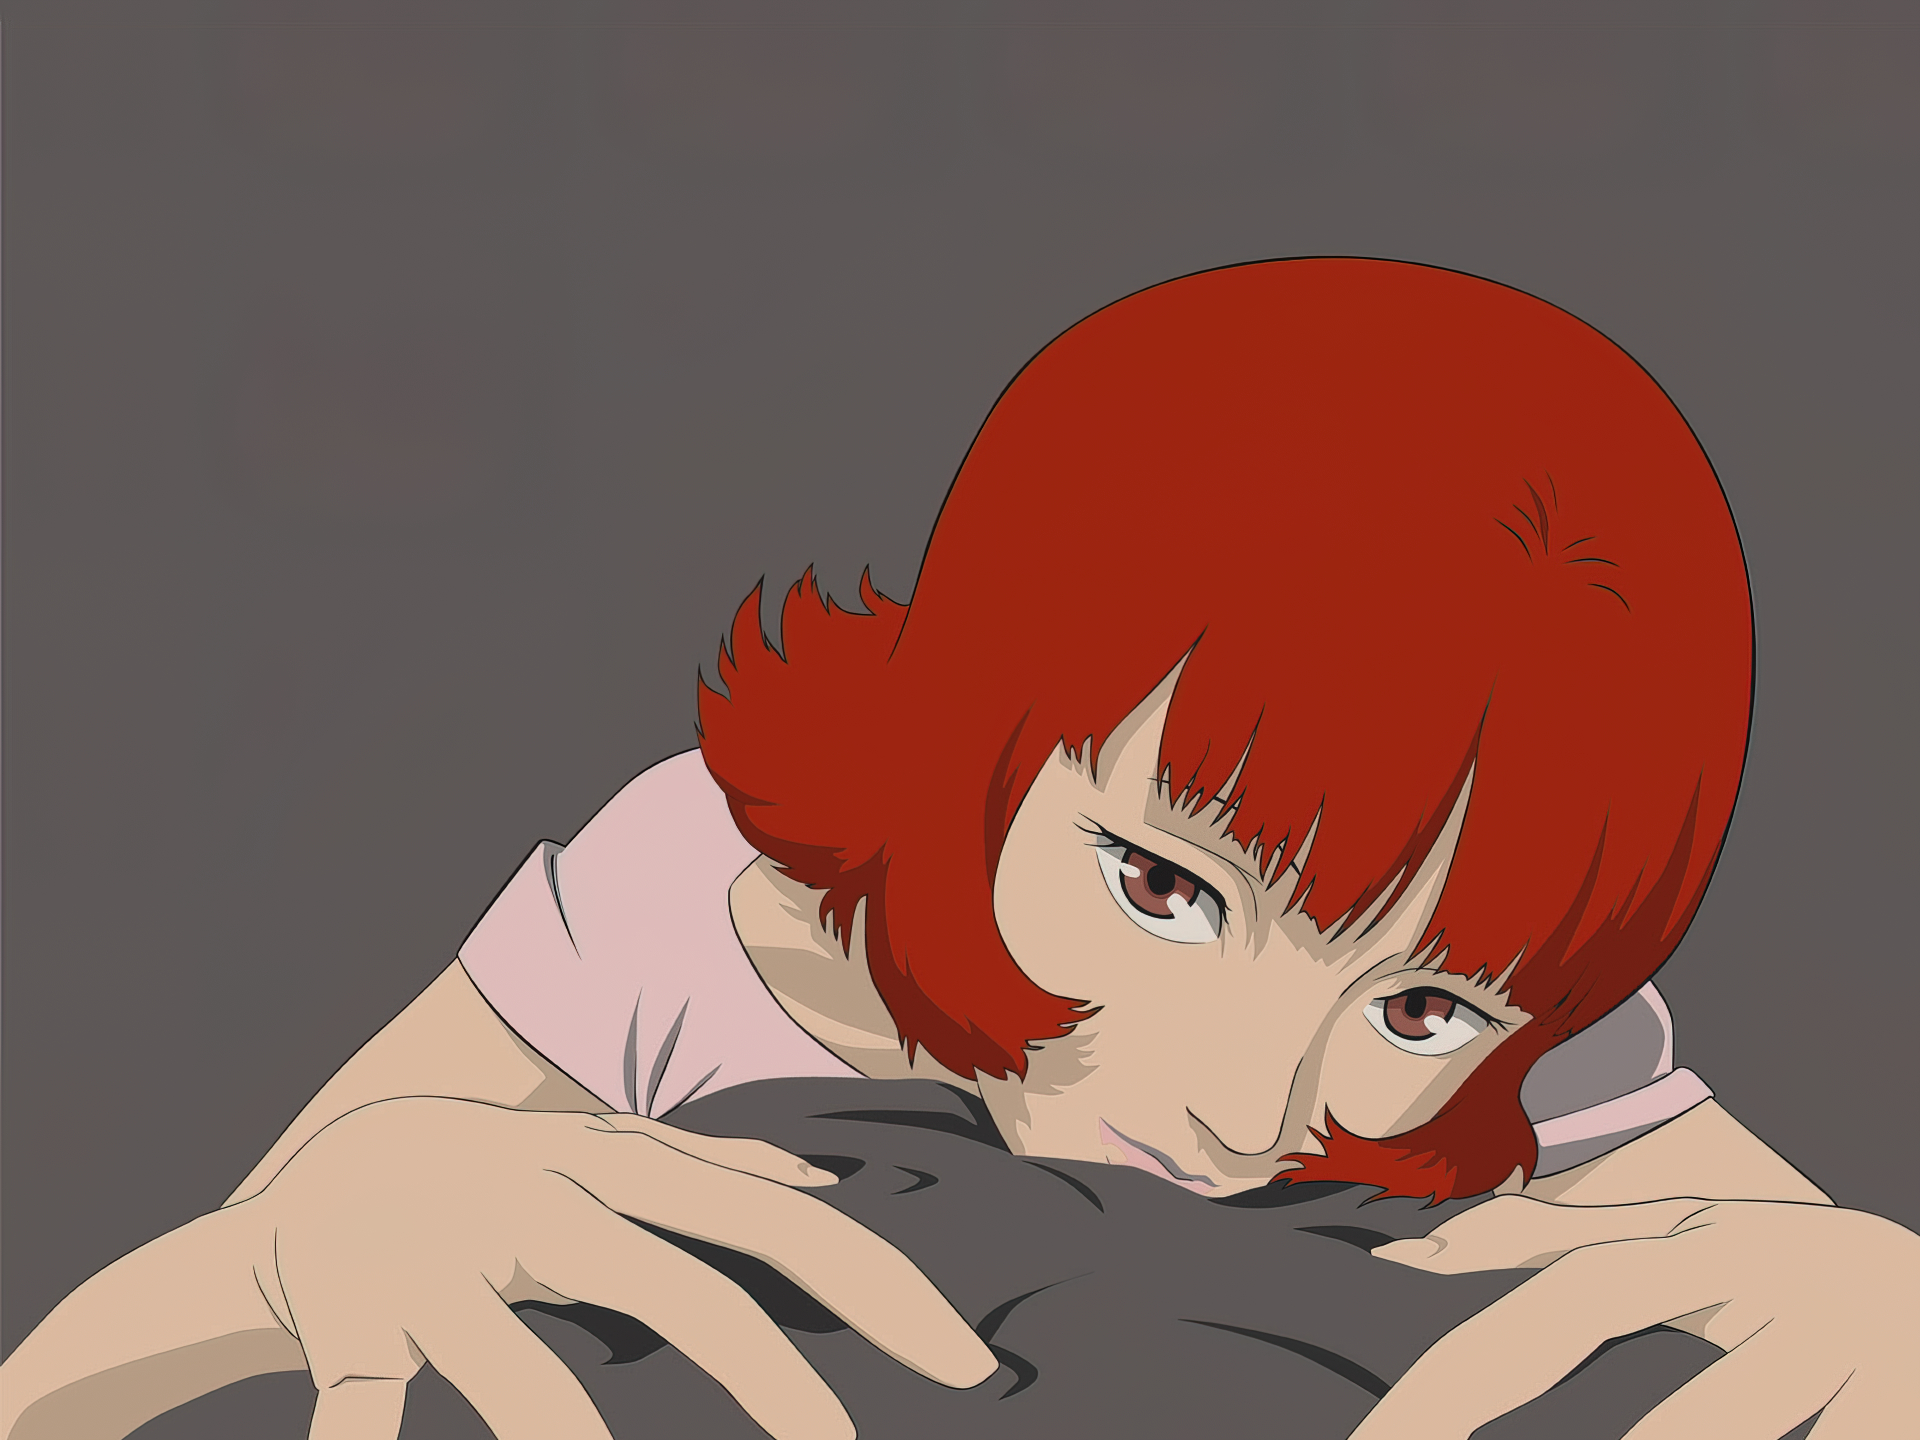 Download Paprika (Anime) wallpapers for mobile phone, free Paprika  (Anime) HD pictures